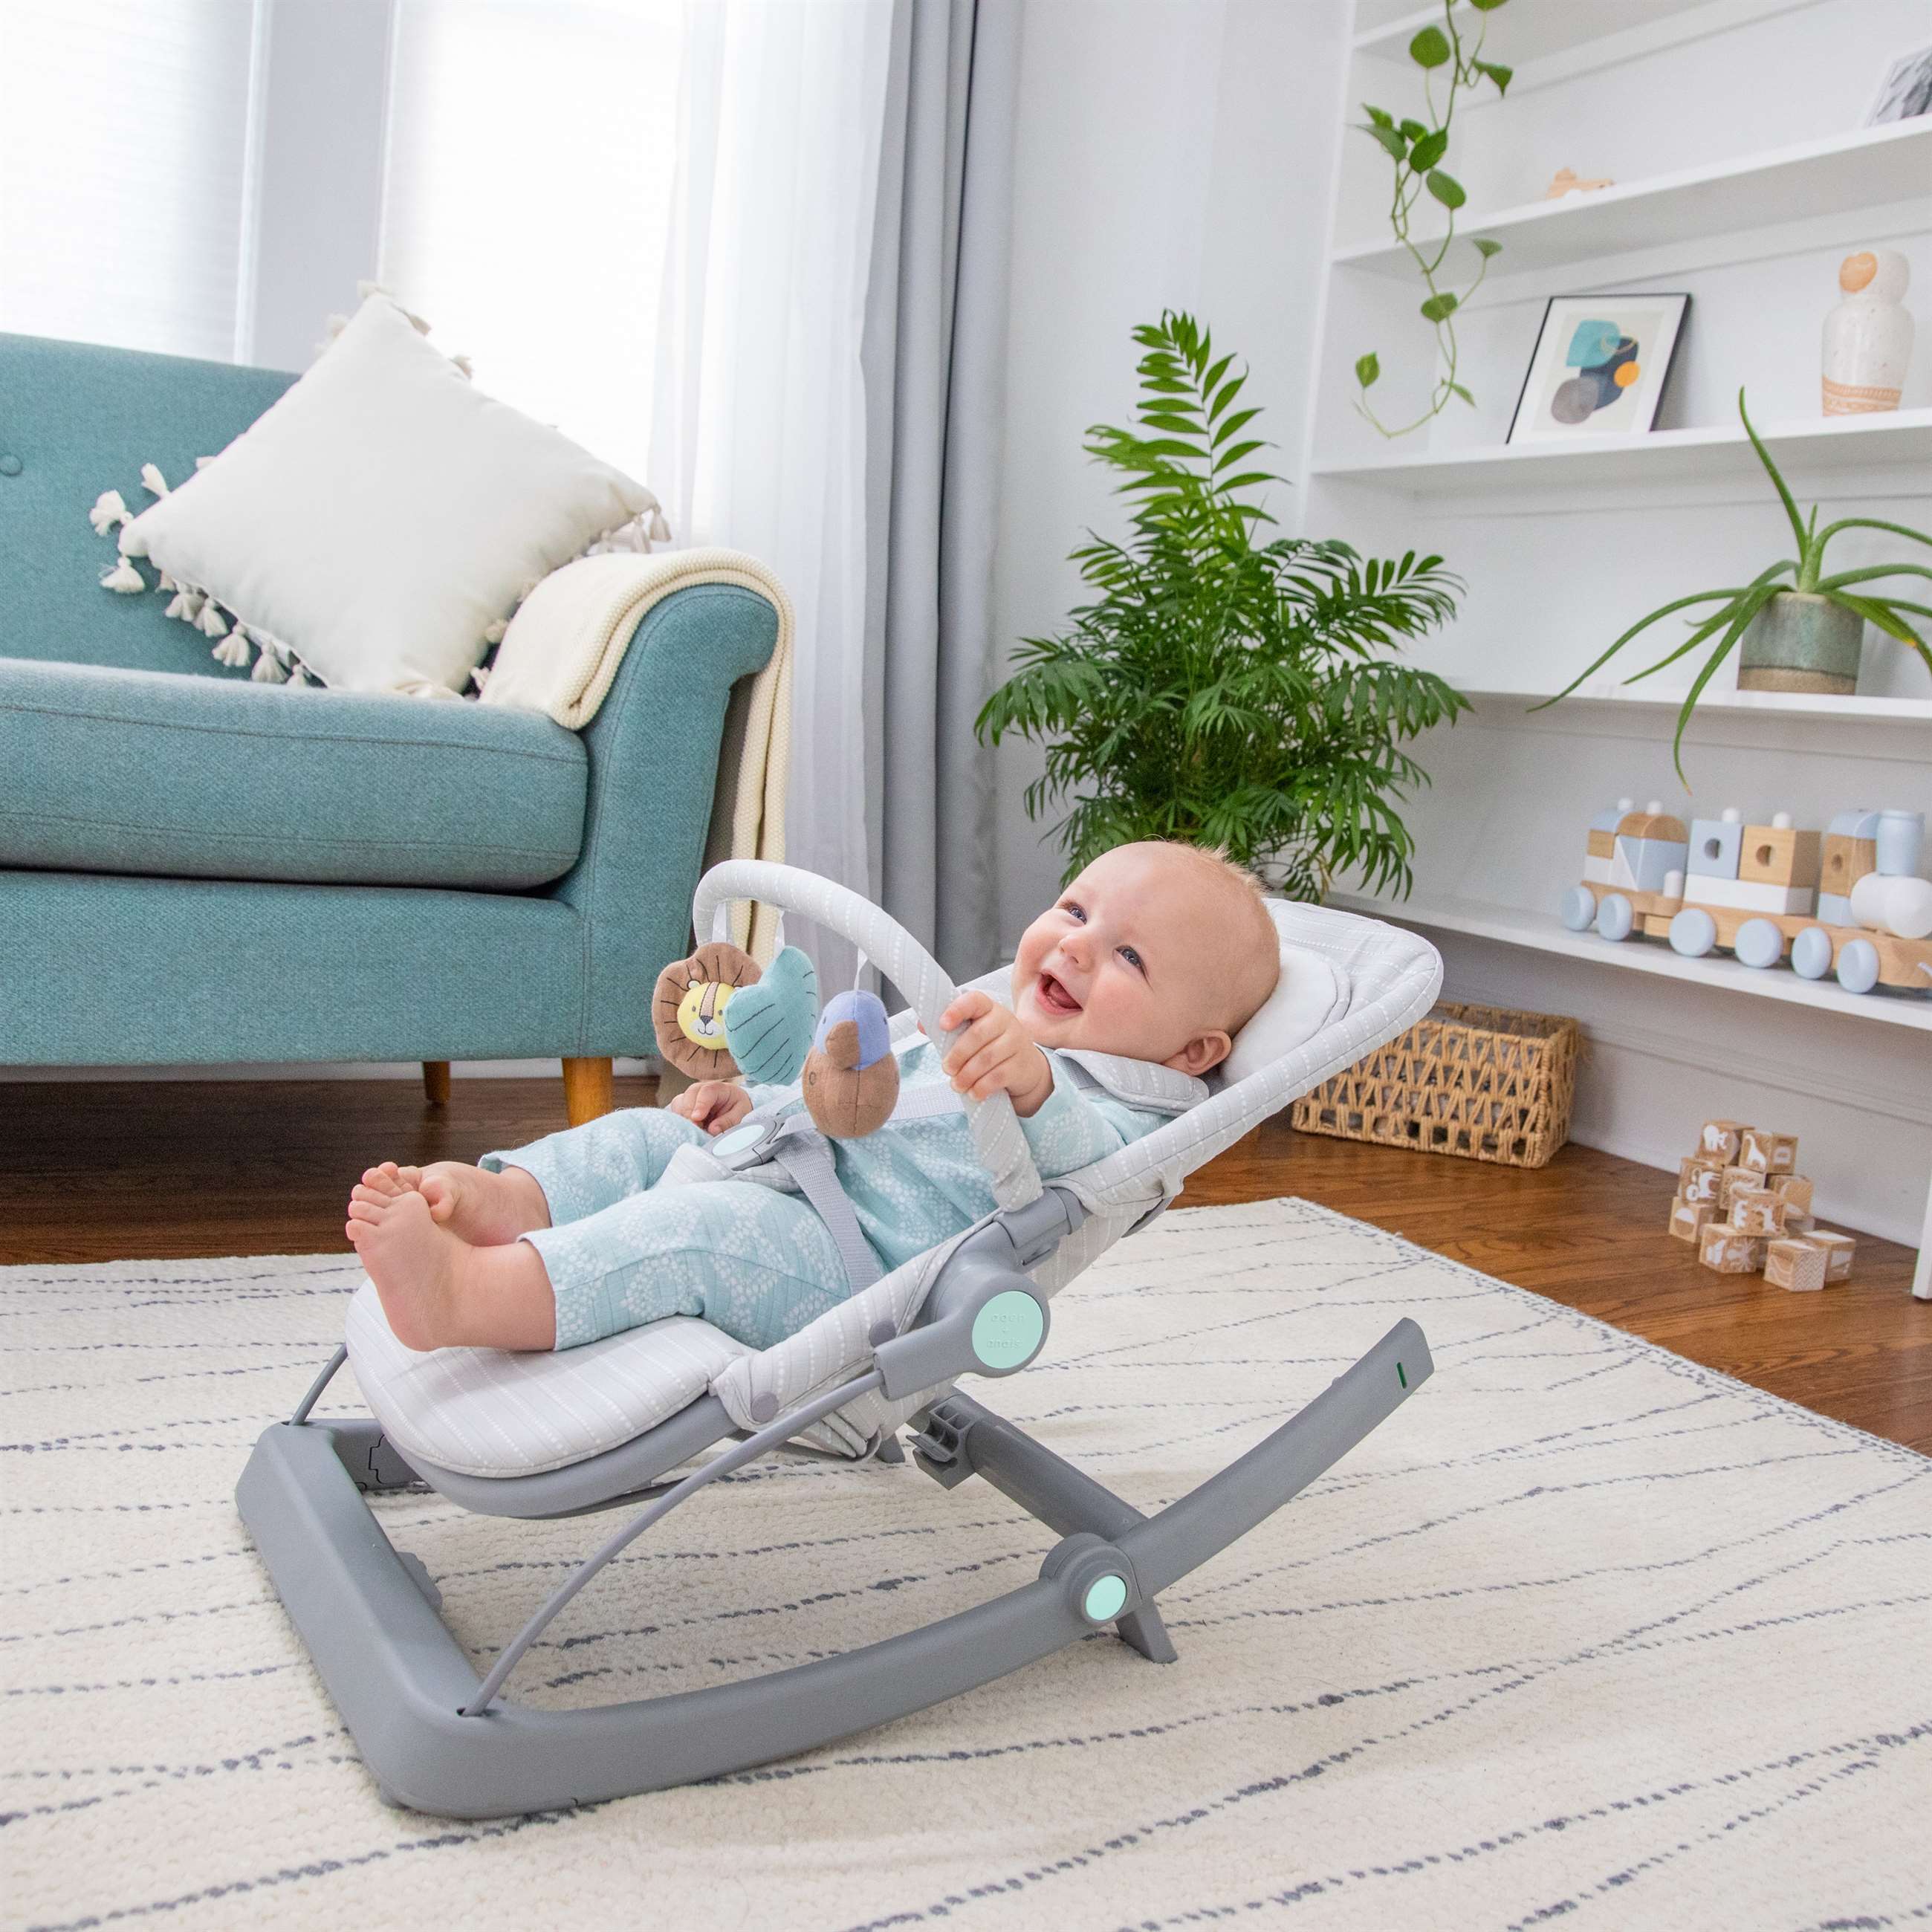 abcm10001_5-baby-3-in-1-transition-seat